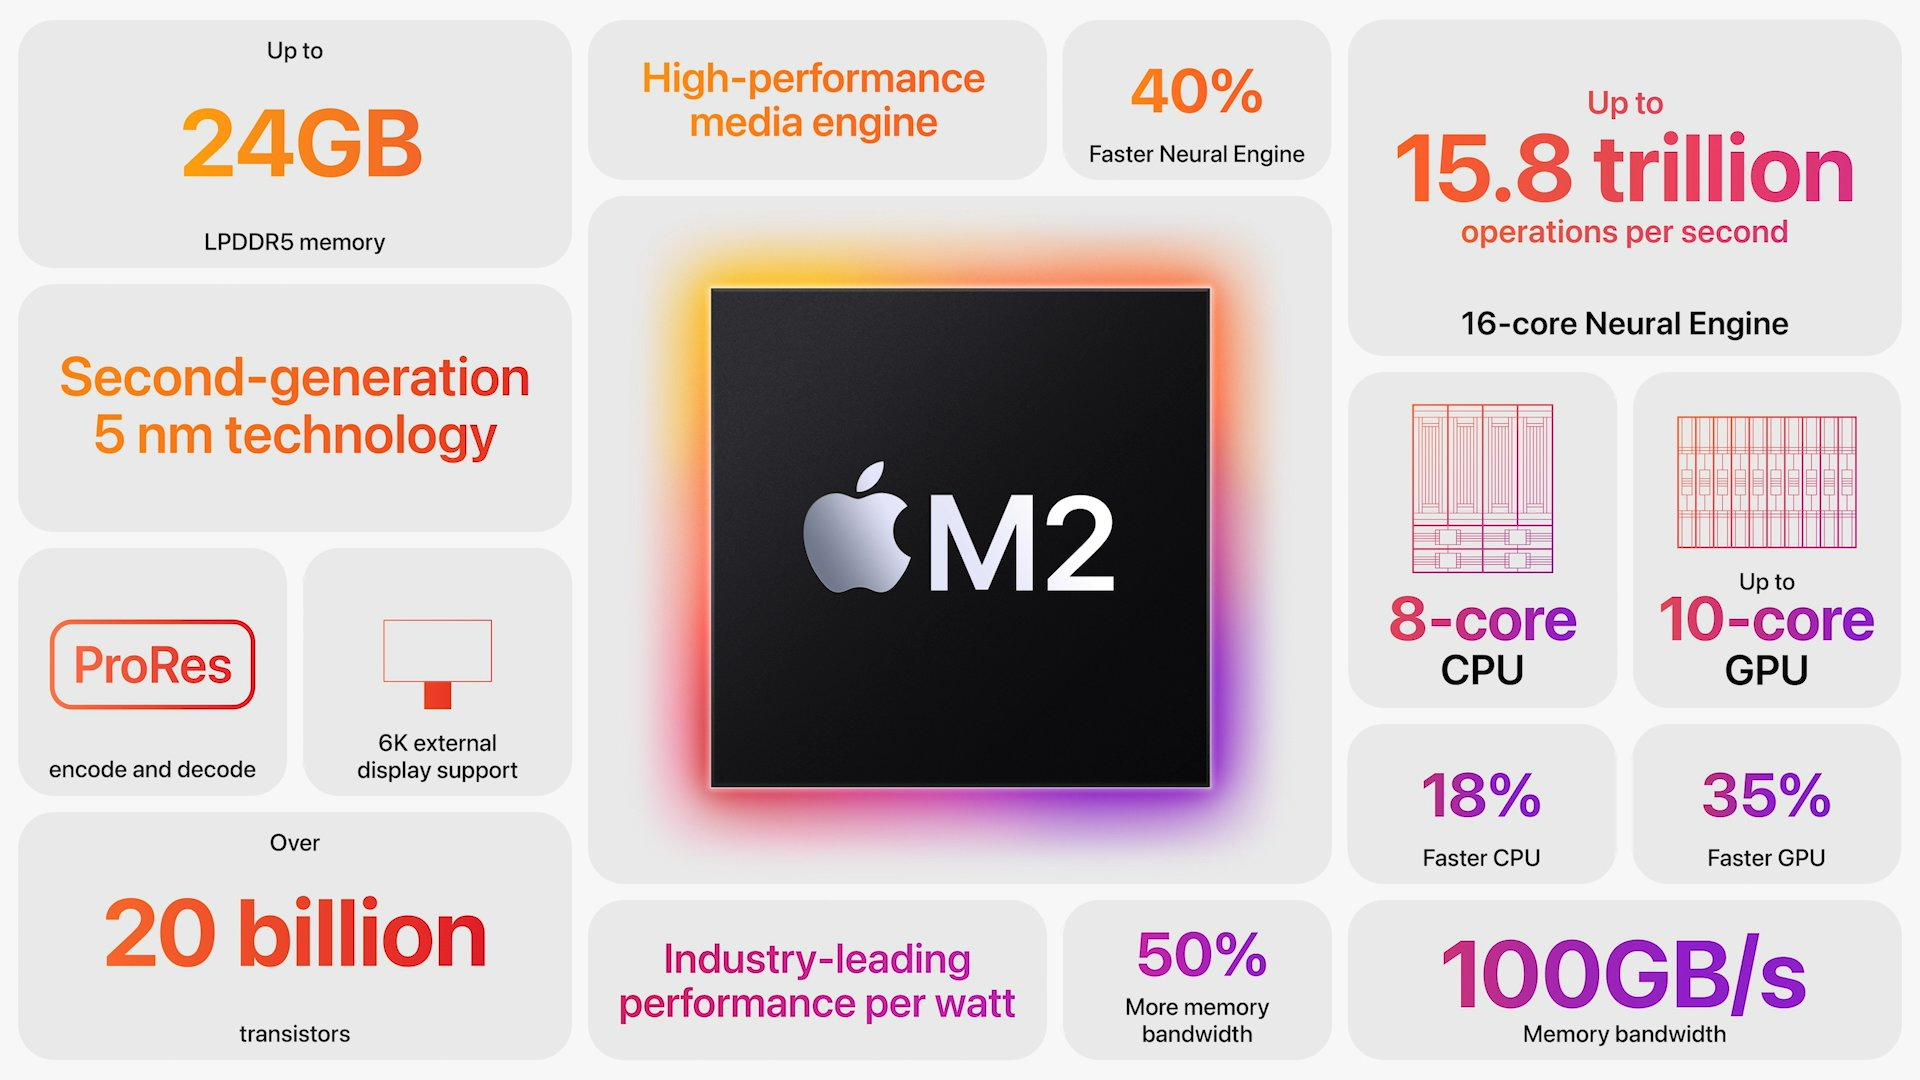 GPU Performance - Great GPU, So-So Thermals Designs - The Apple A15 SoC  Performance Review: Faster & More Efficient